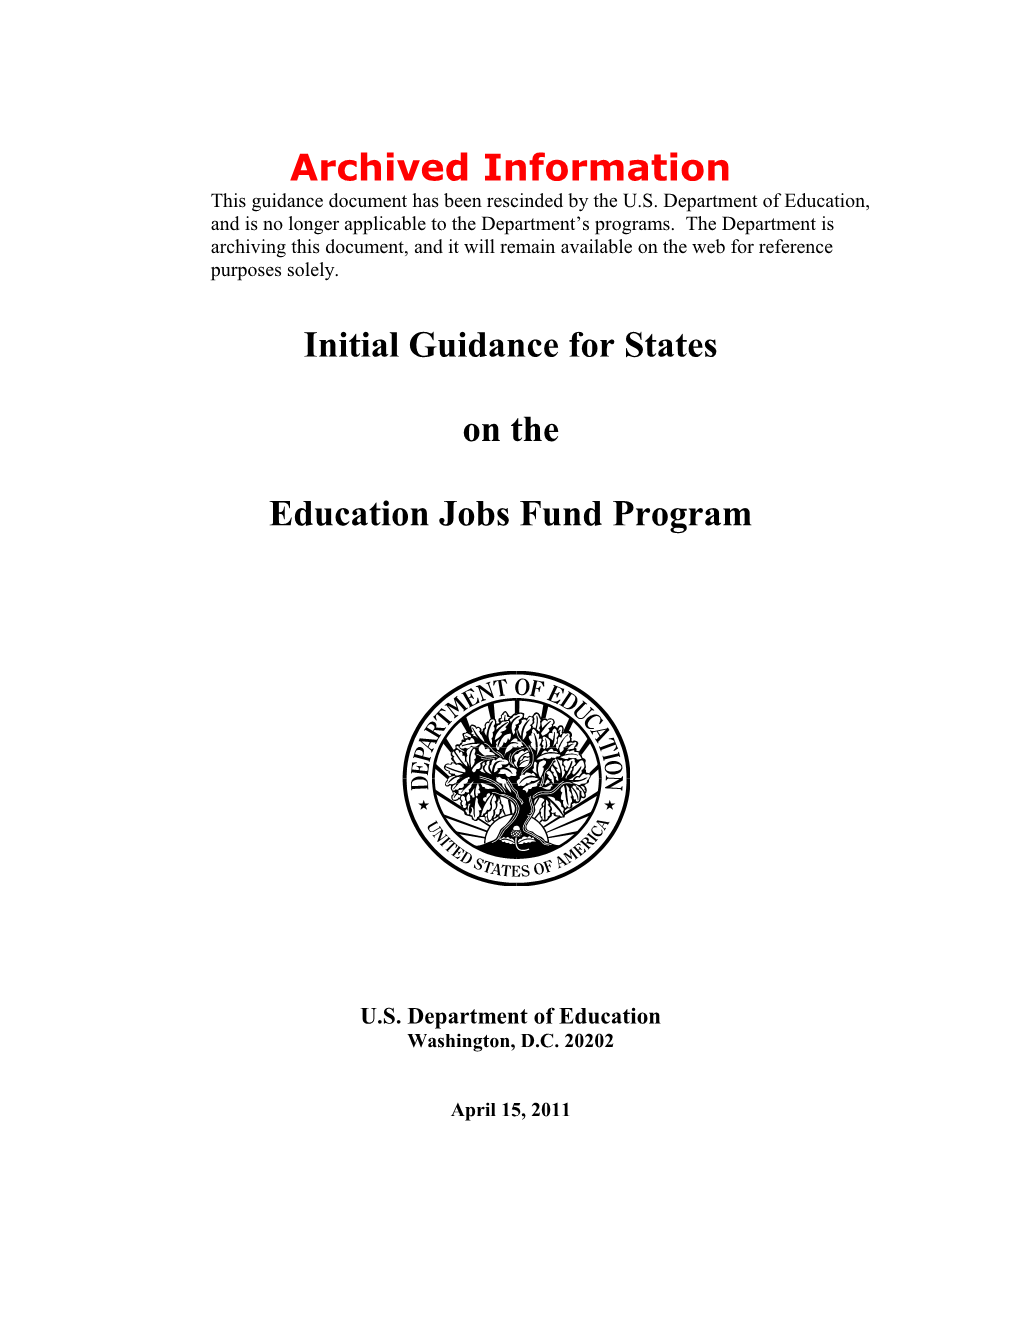 Archived: Initial Guidance for States on the Education Jobs Fund Program (MS Word)